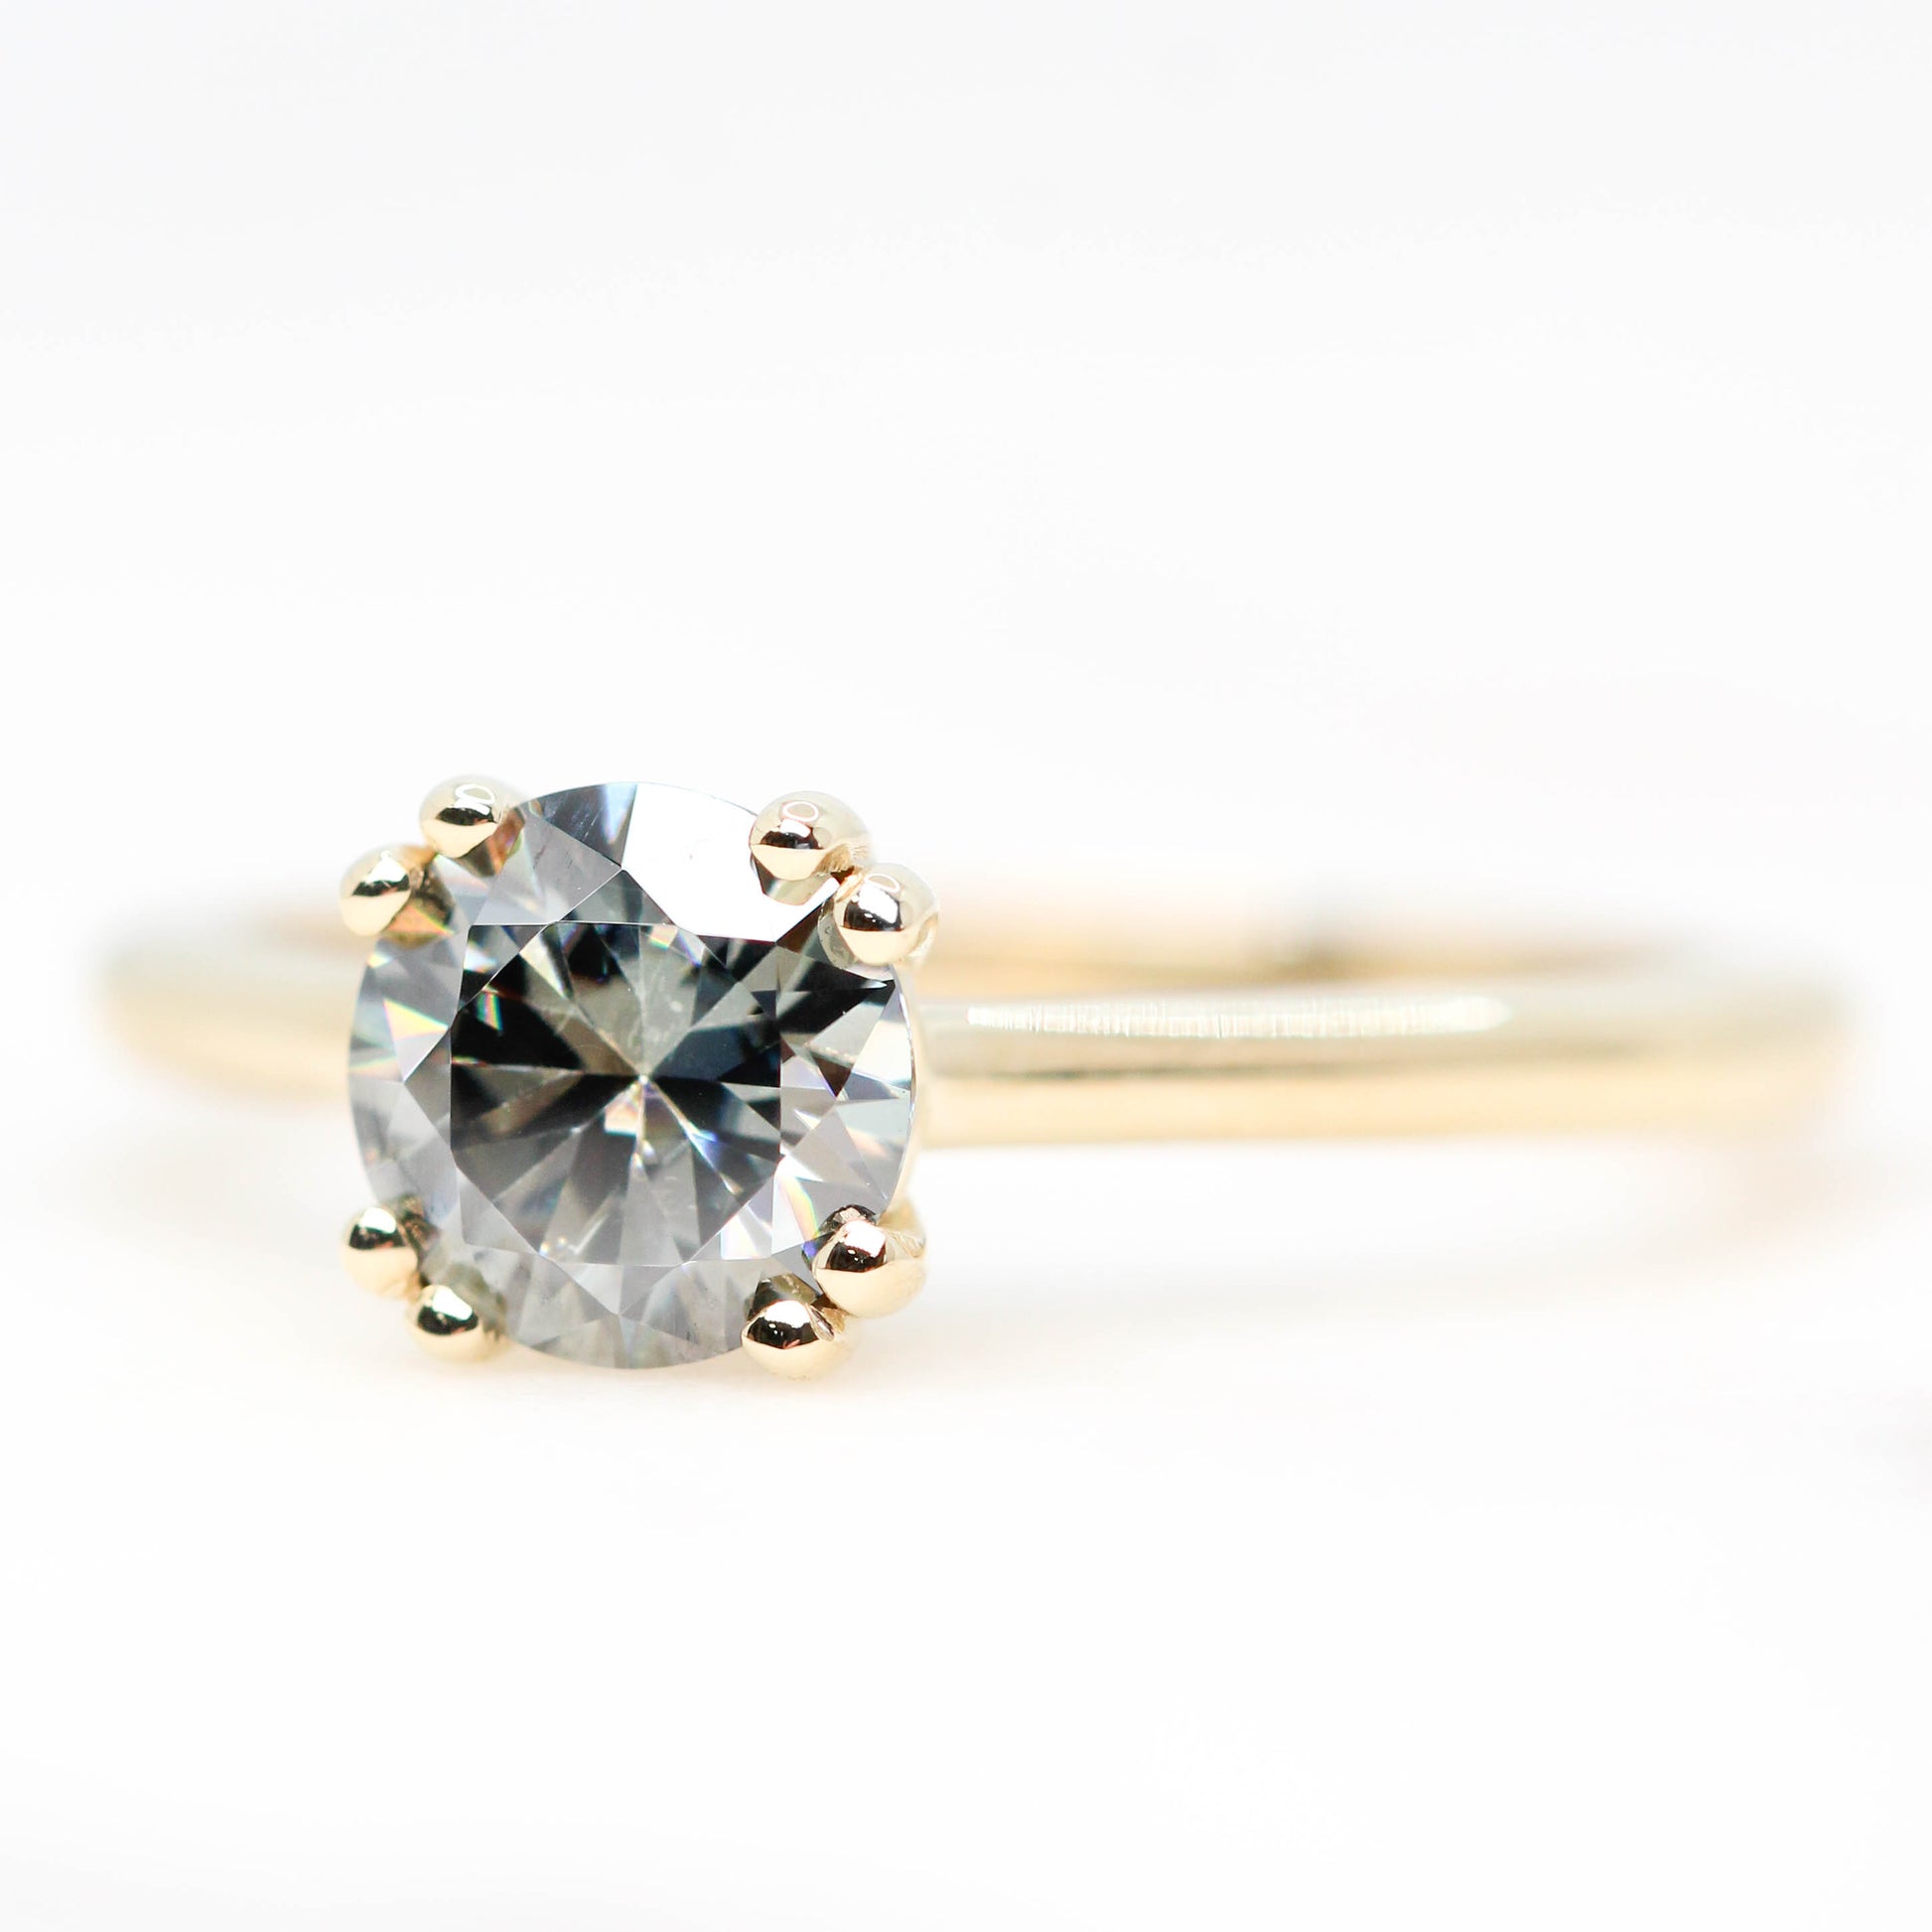 Nesta Ring with a Round Gray Moissanite - Made to Order, Choose Your Gold Tone - Midwinter Co. Alternative Bridal Rings and Modern Fine Jewelry